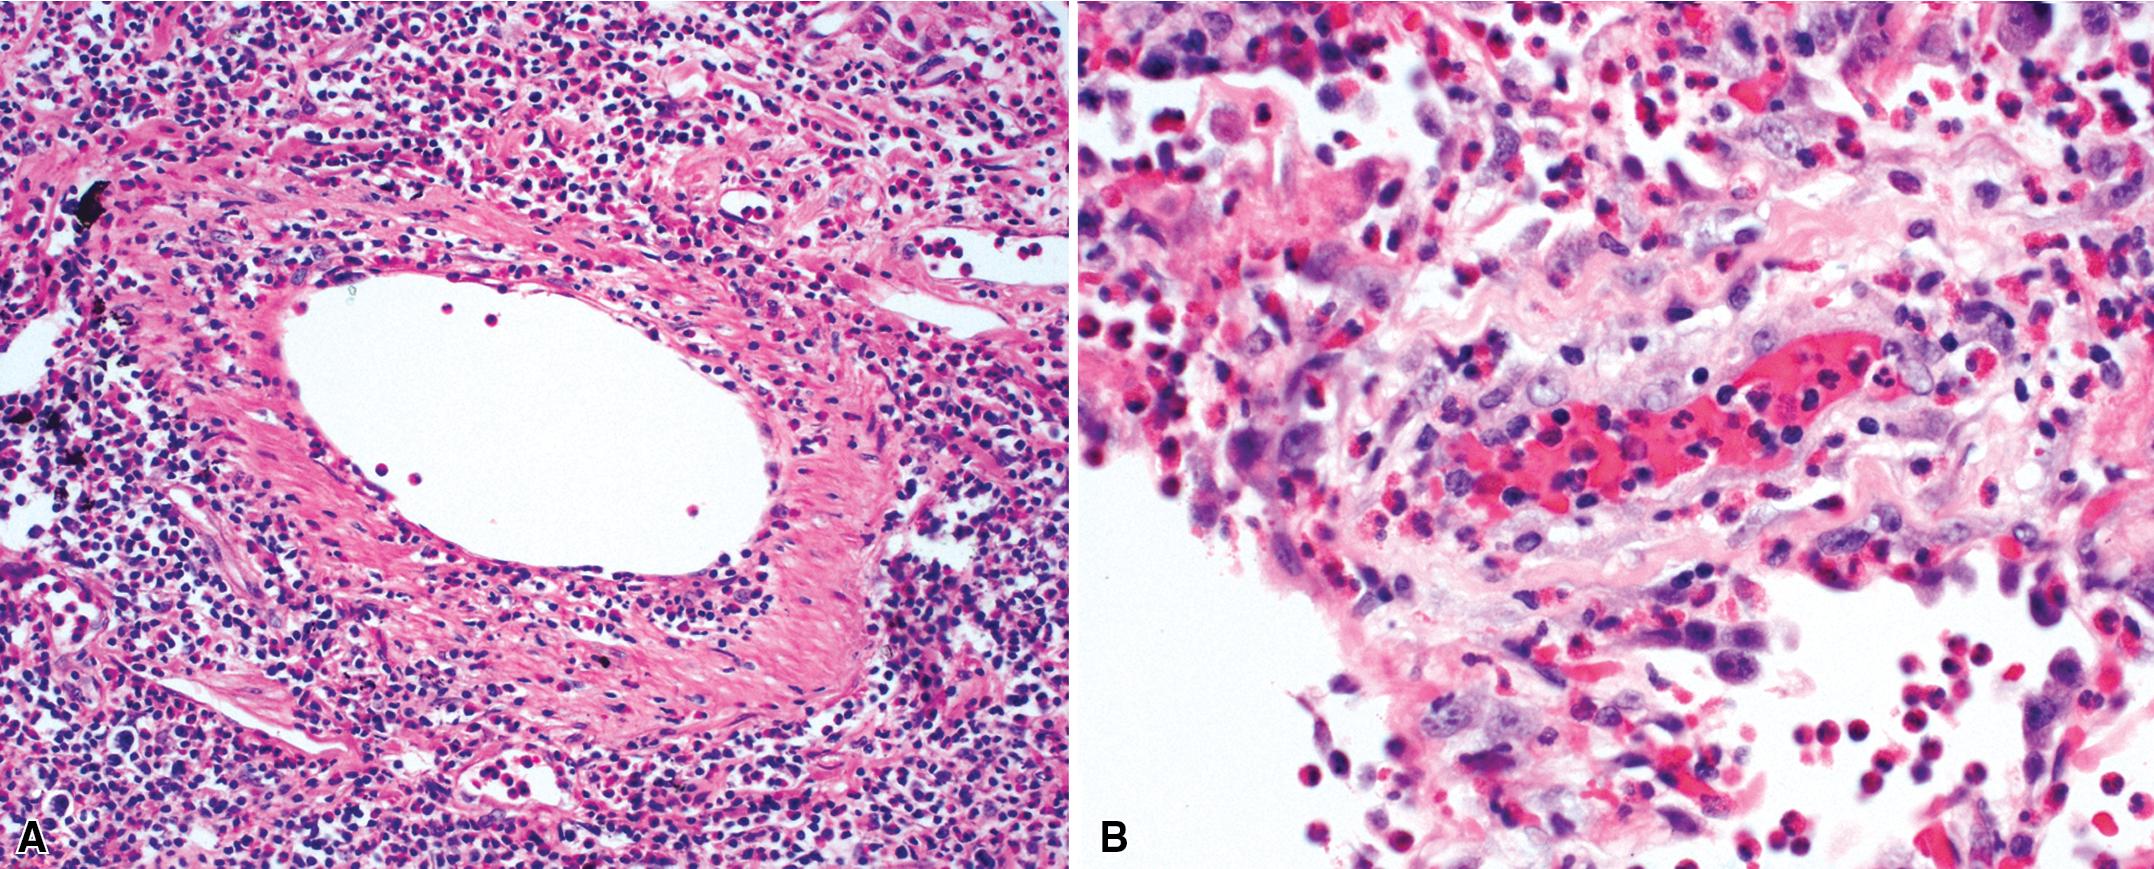 Figure 11.28, Eosinophilic granulomatosis with polyangiitis (EGPA): vasculitis. Vasculitis is characteristic in EGPA. (A) A medium-sized artery infiltrated by eosinophils and scattered lymphocytes. (B) A venule infiltrated by eosinophils. Note fibrin and eosinophils in surrounding air spaces.